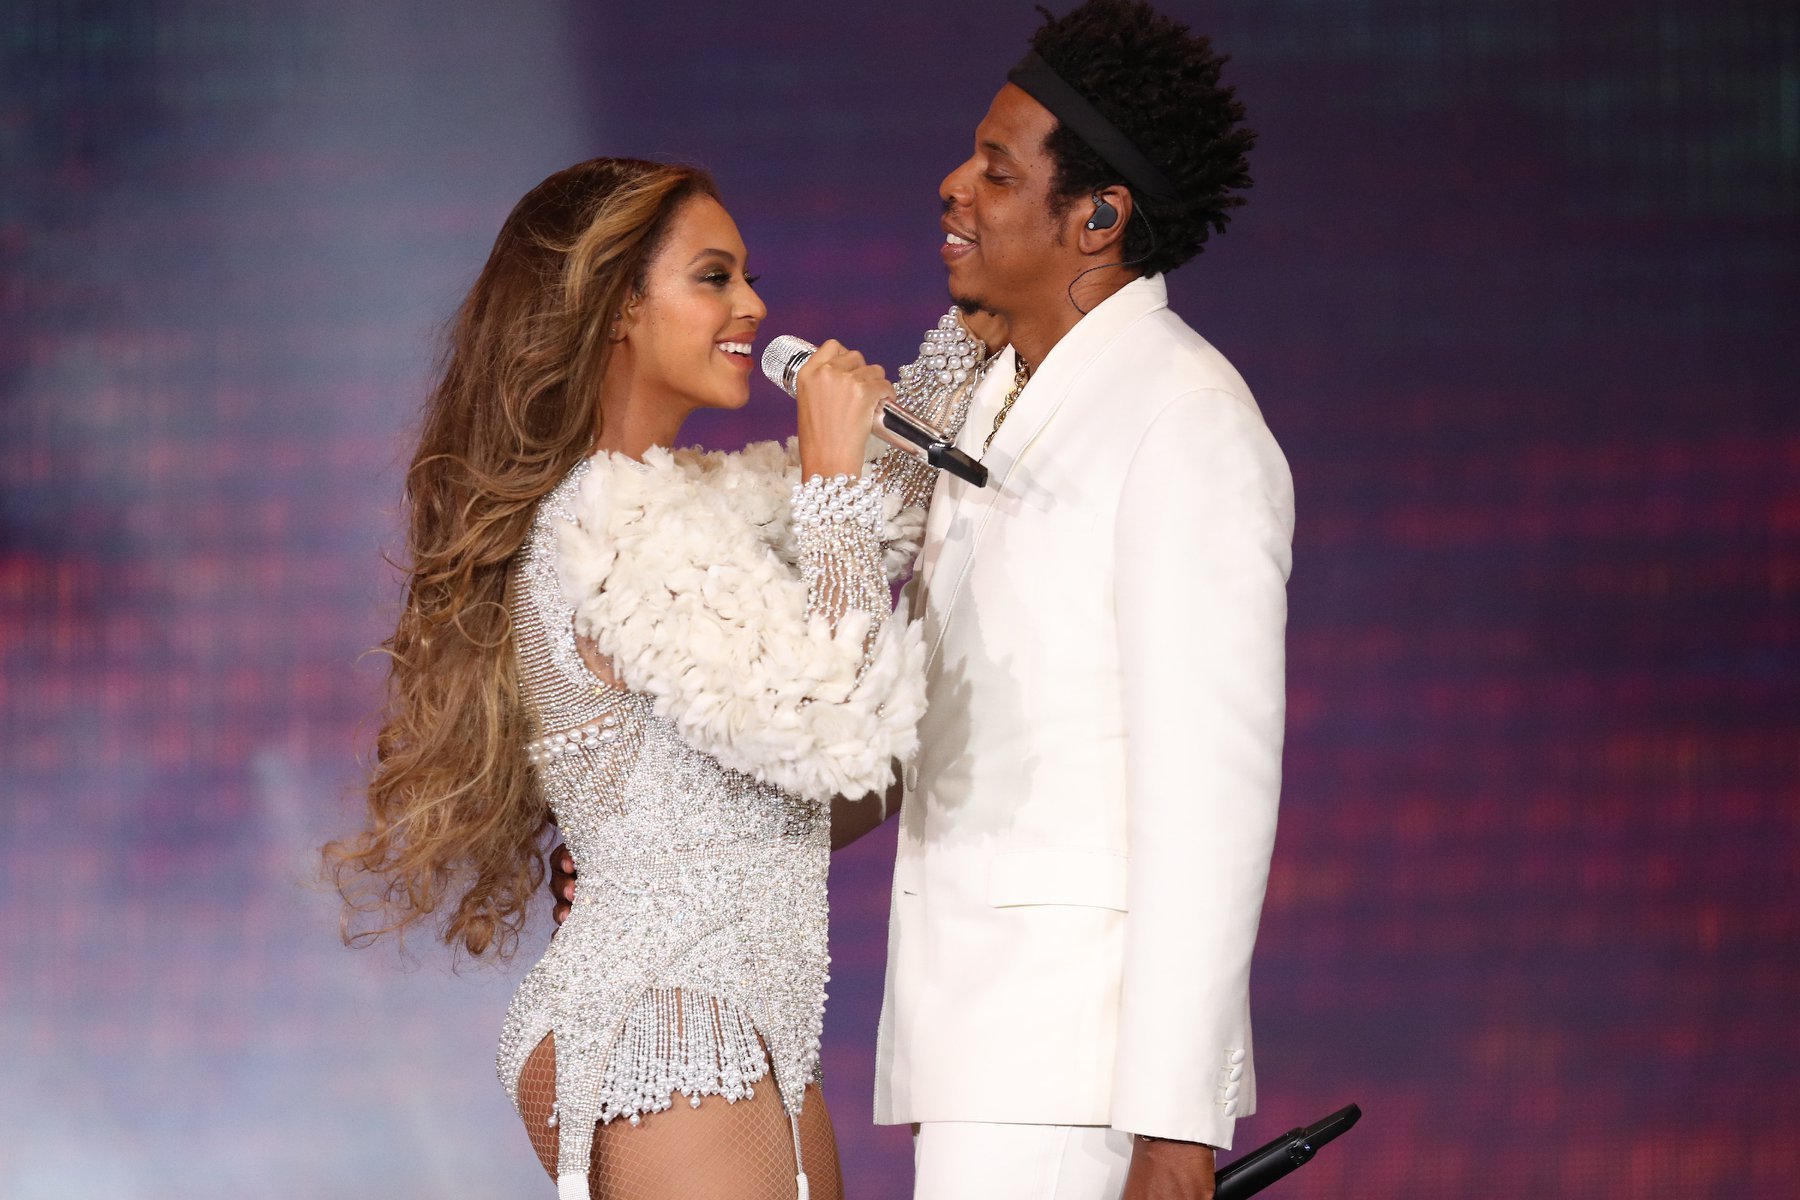 Jay-Z and his wife Beyonce performing on stage in Houston in 2018